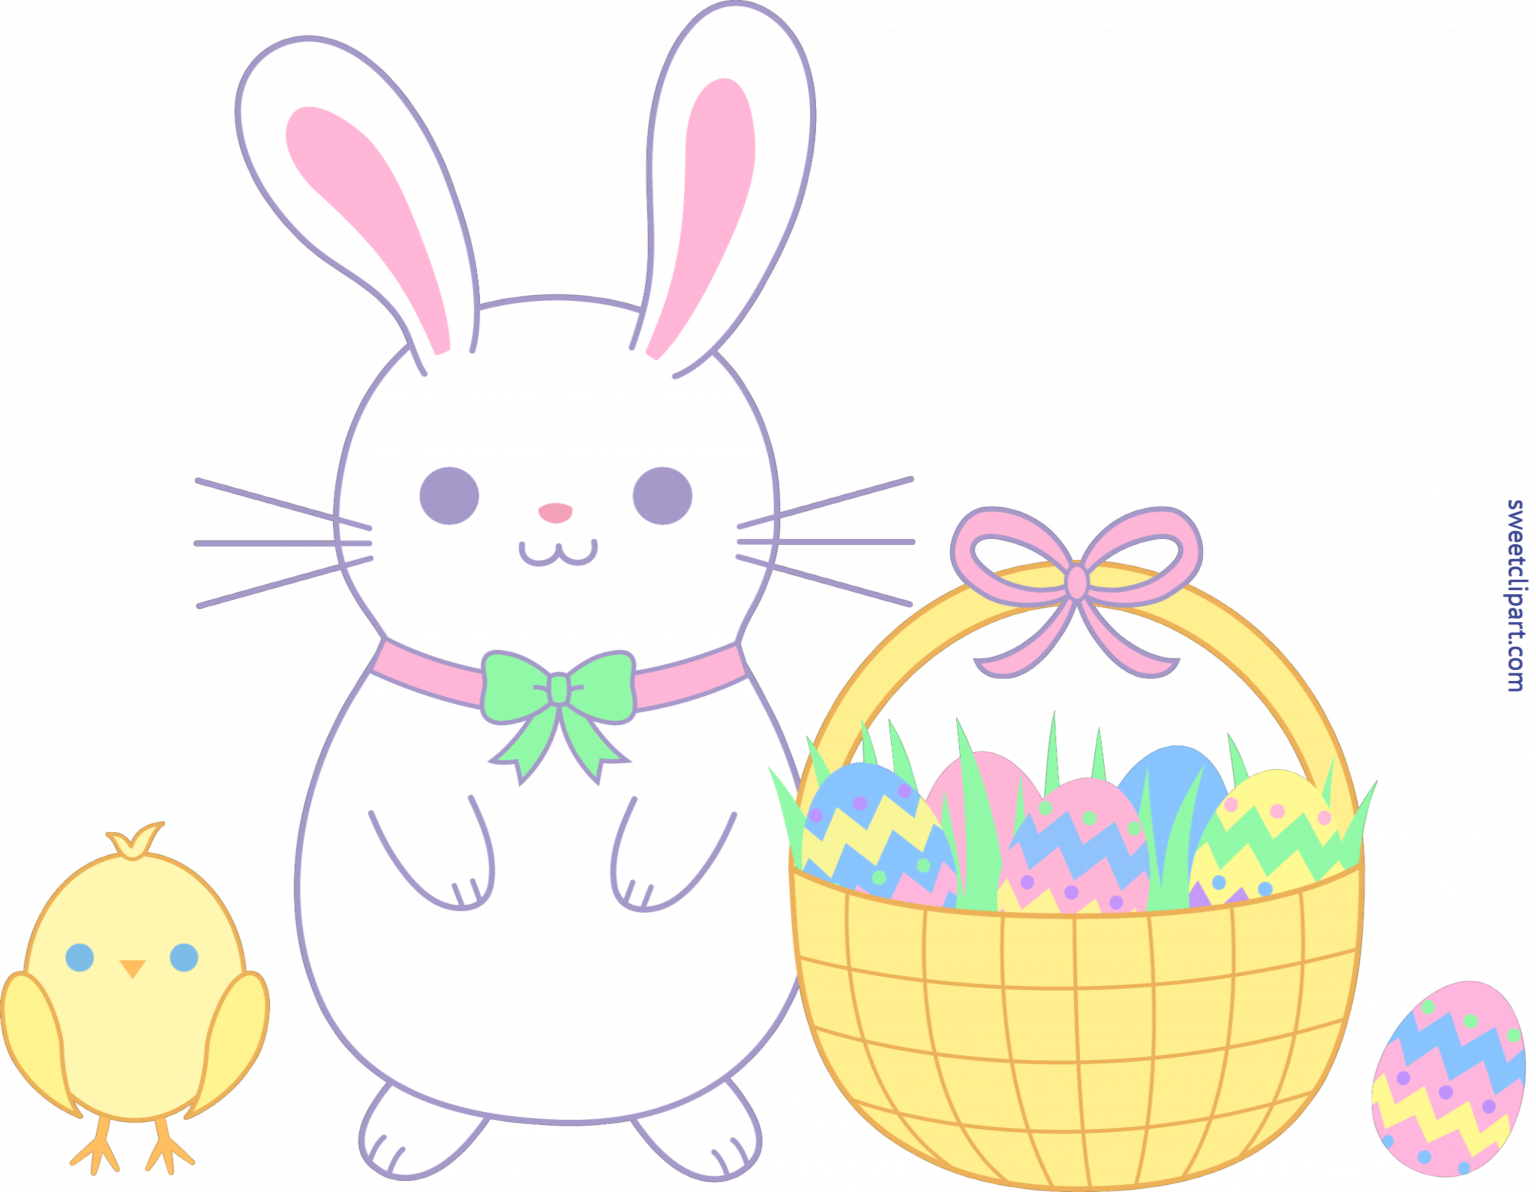 Cute Easter Bunny Chick Basket Clip Art.